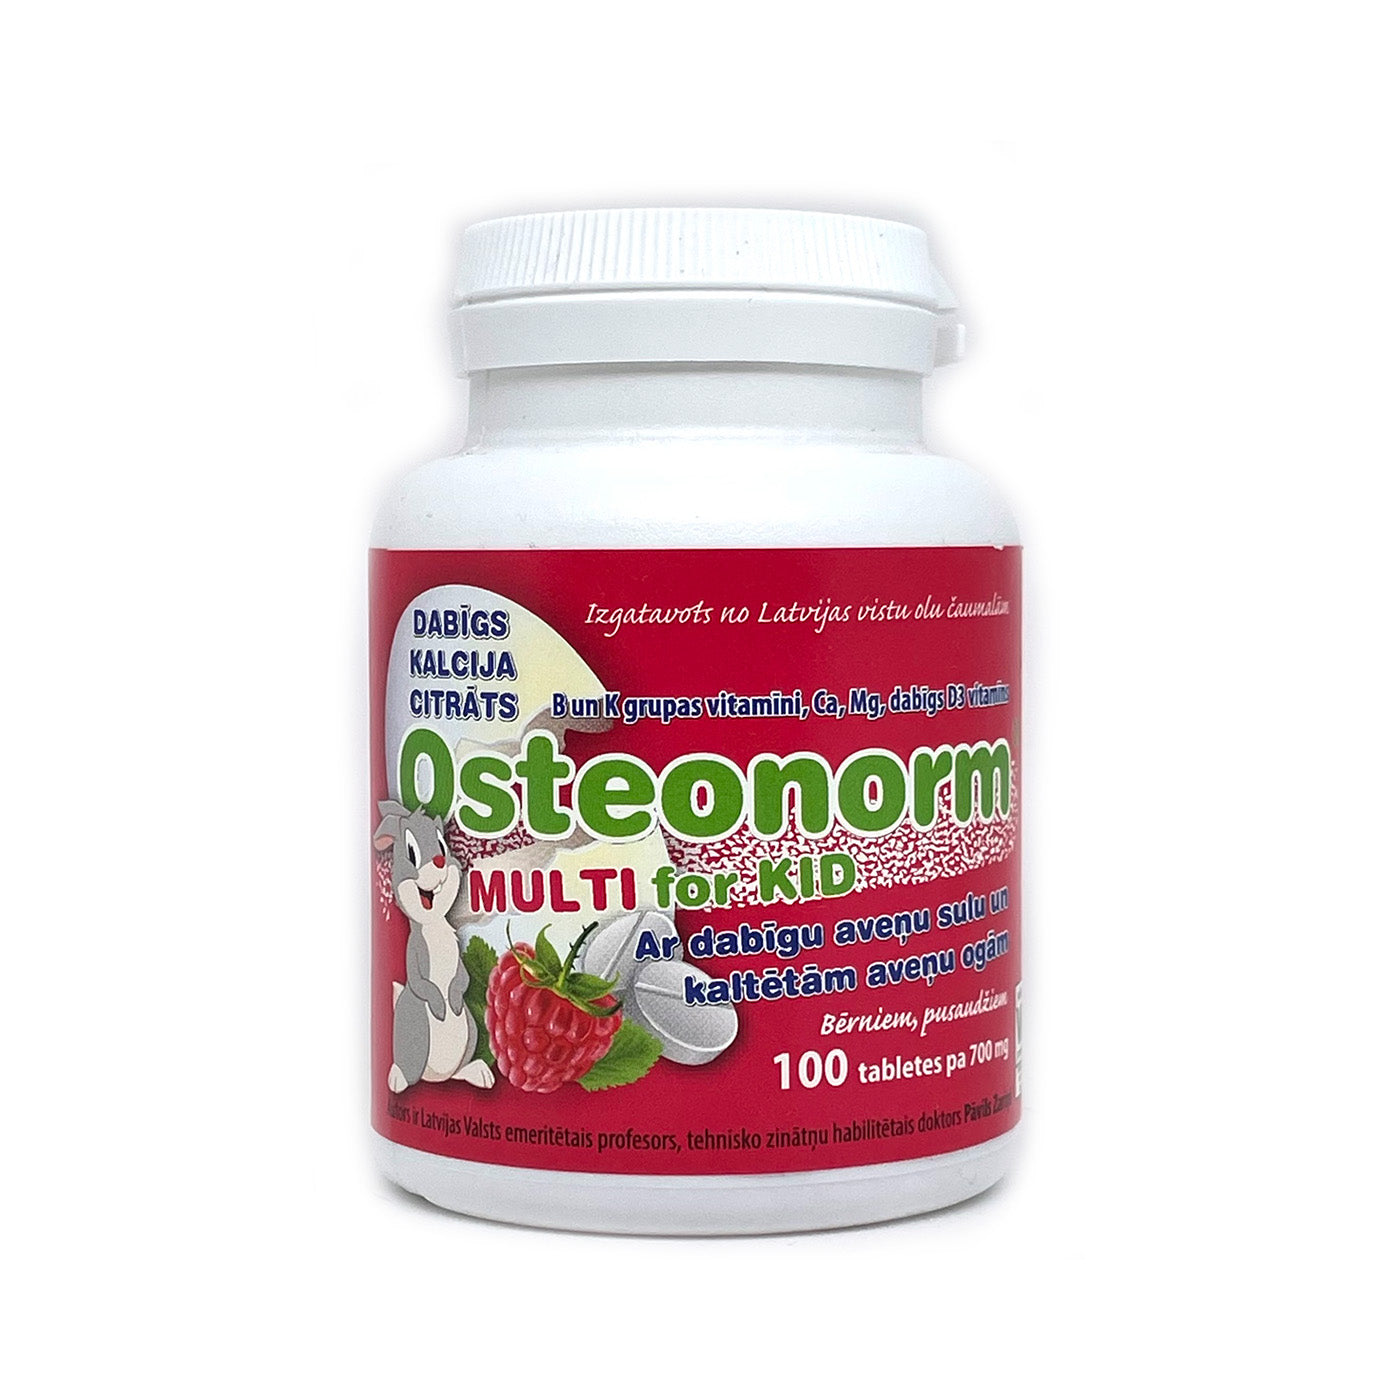 Osteonorm Multi for Kid 700 mg, 100 tablets